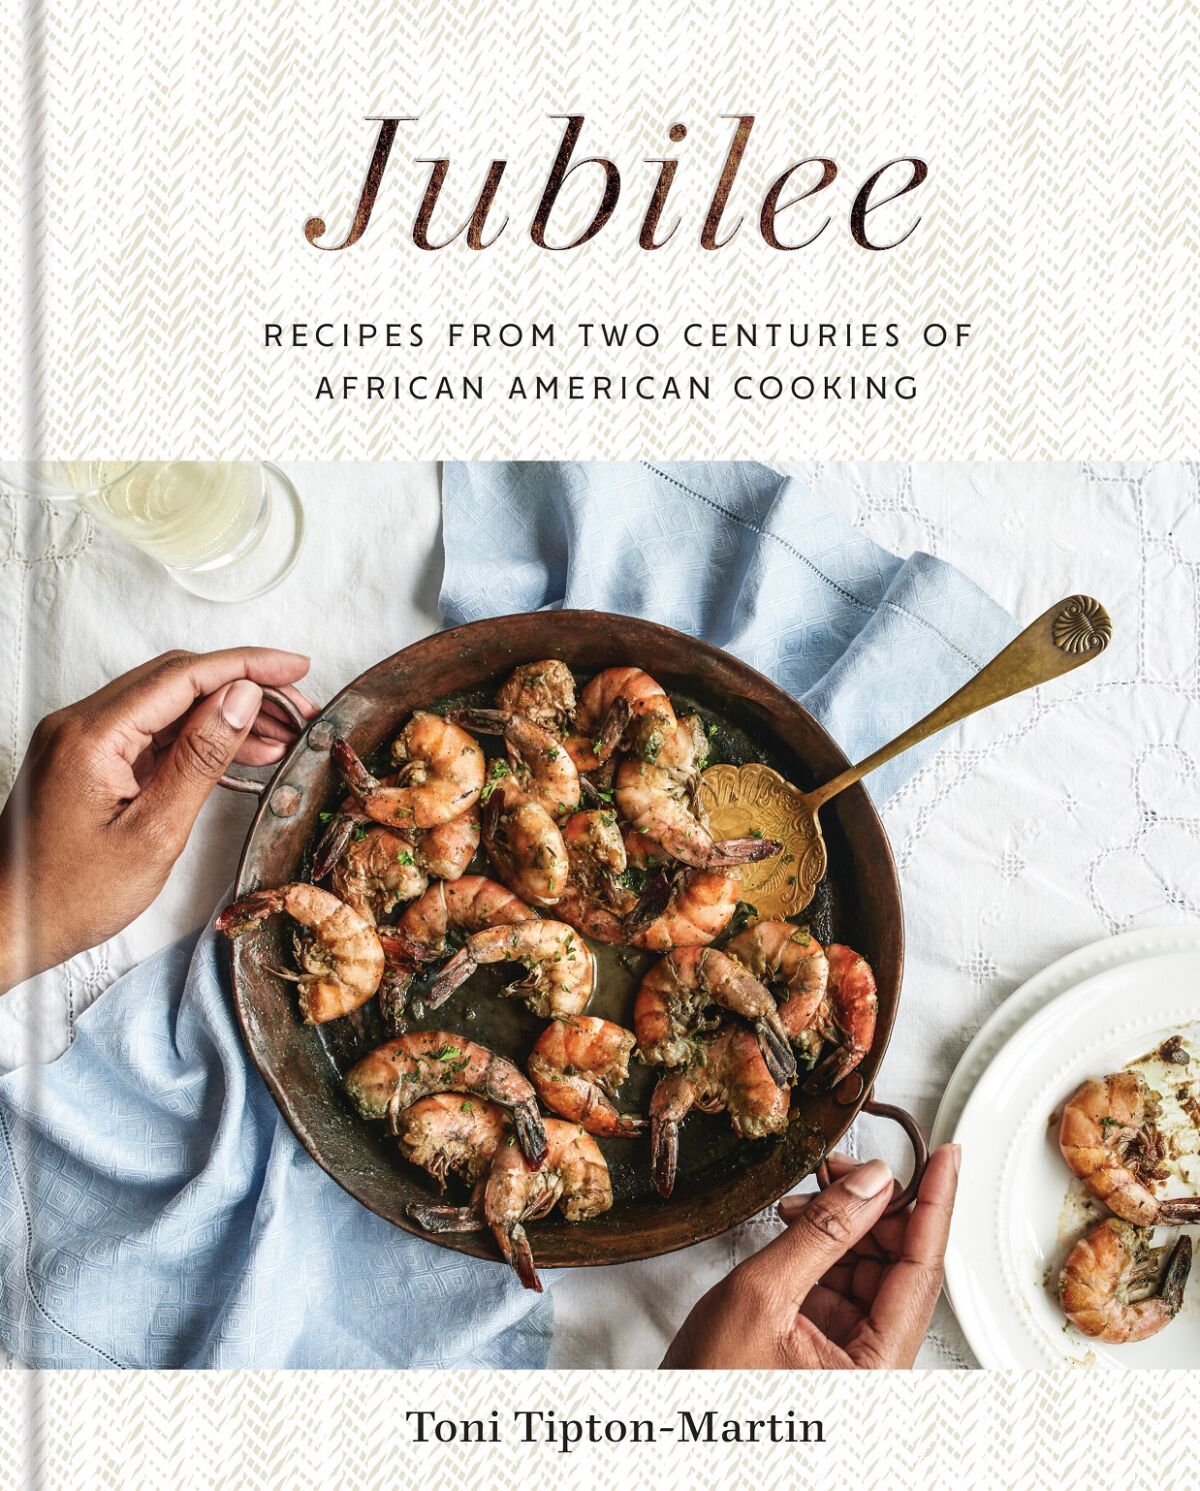 "Jubilee: Recipes From Two Centuries of African American Cooking" by Toni Tipton-Martin